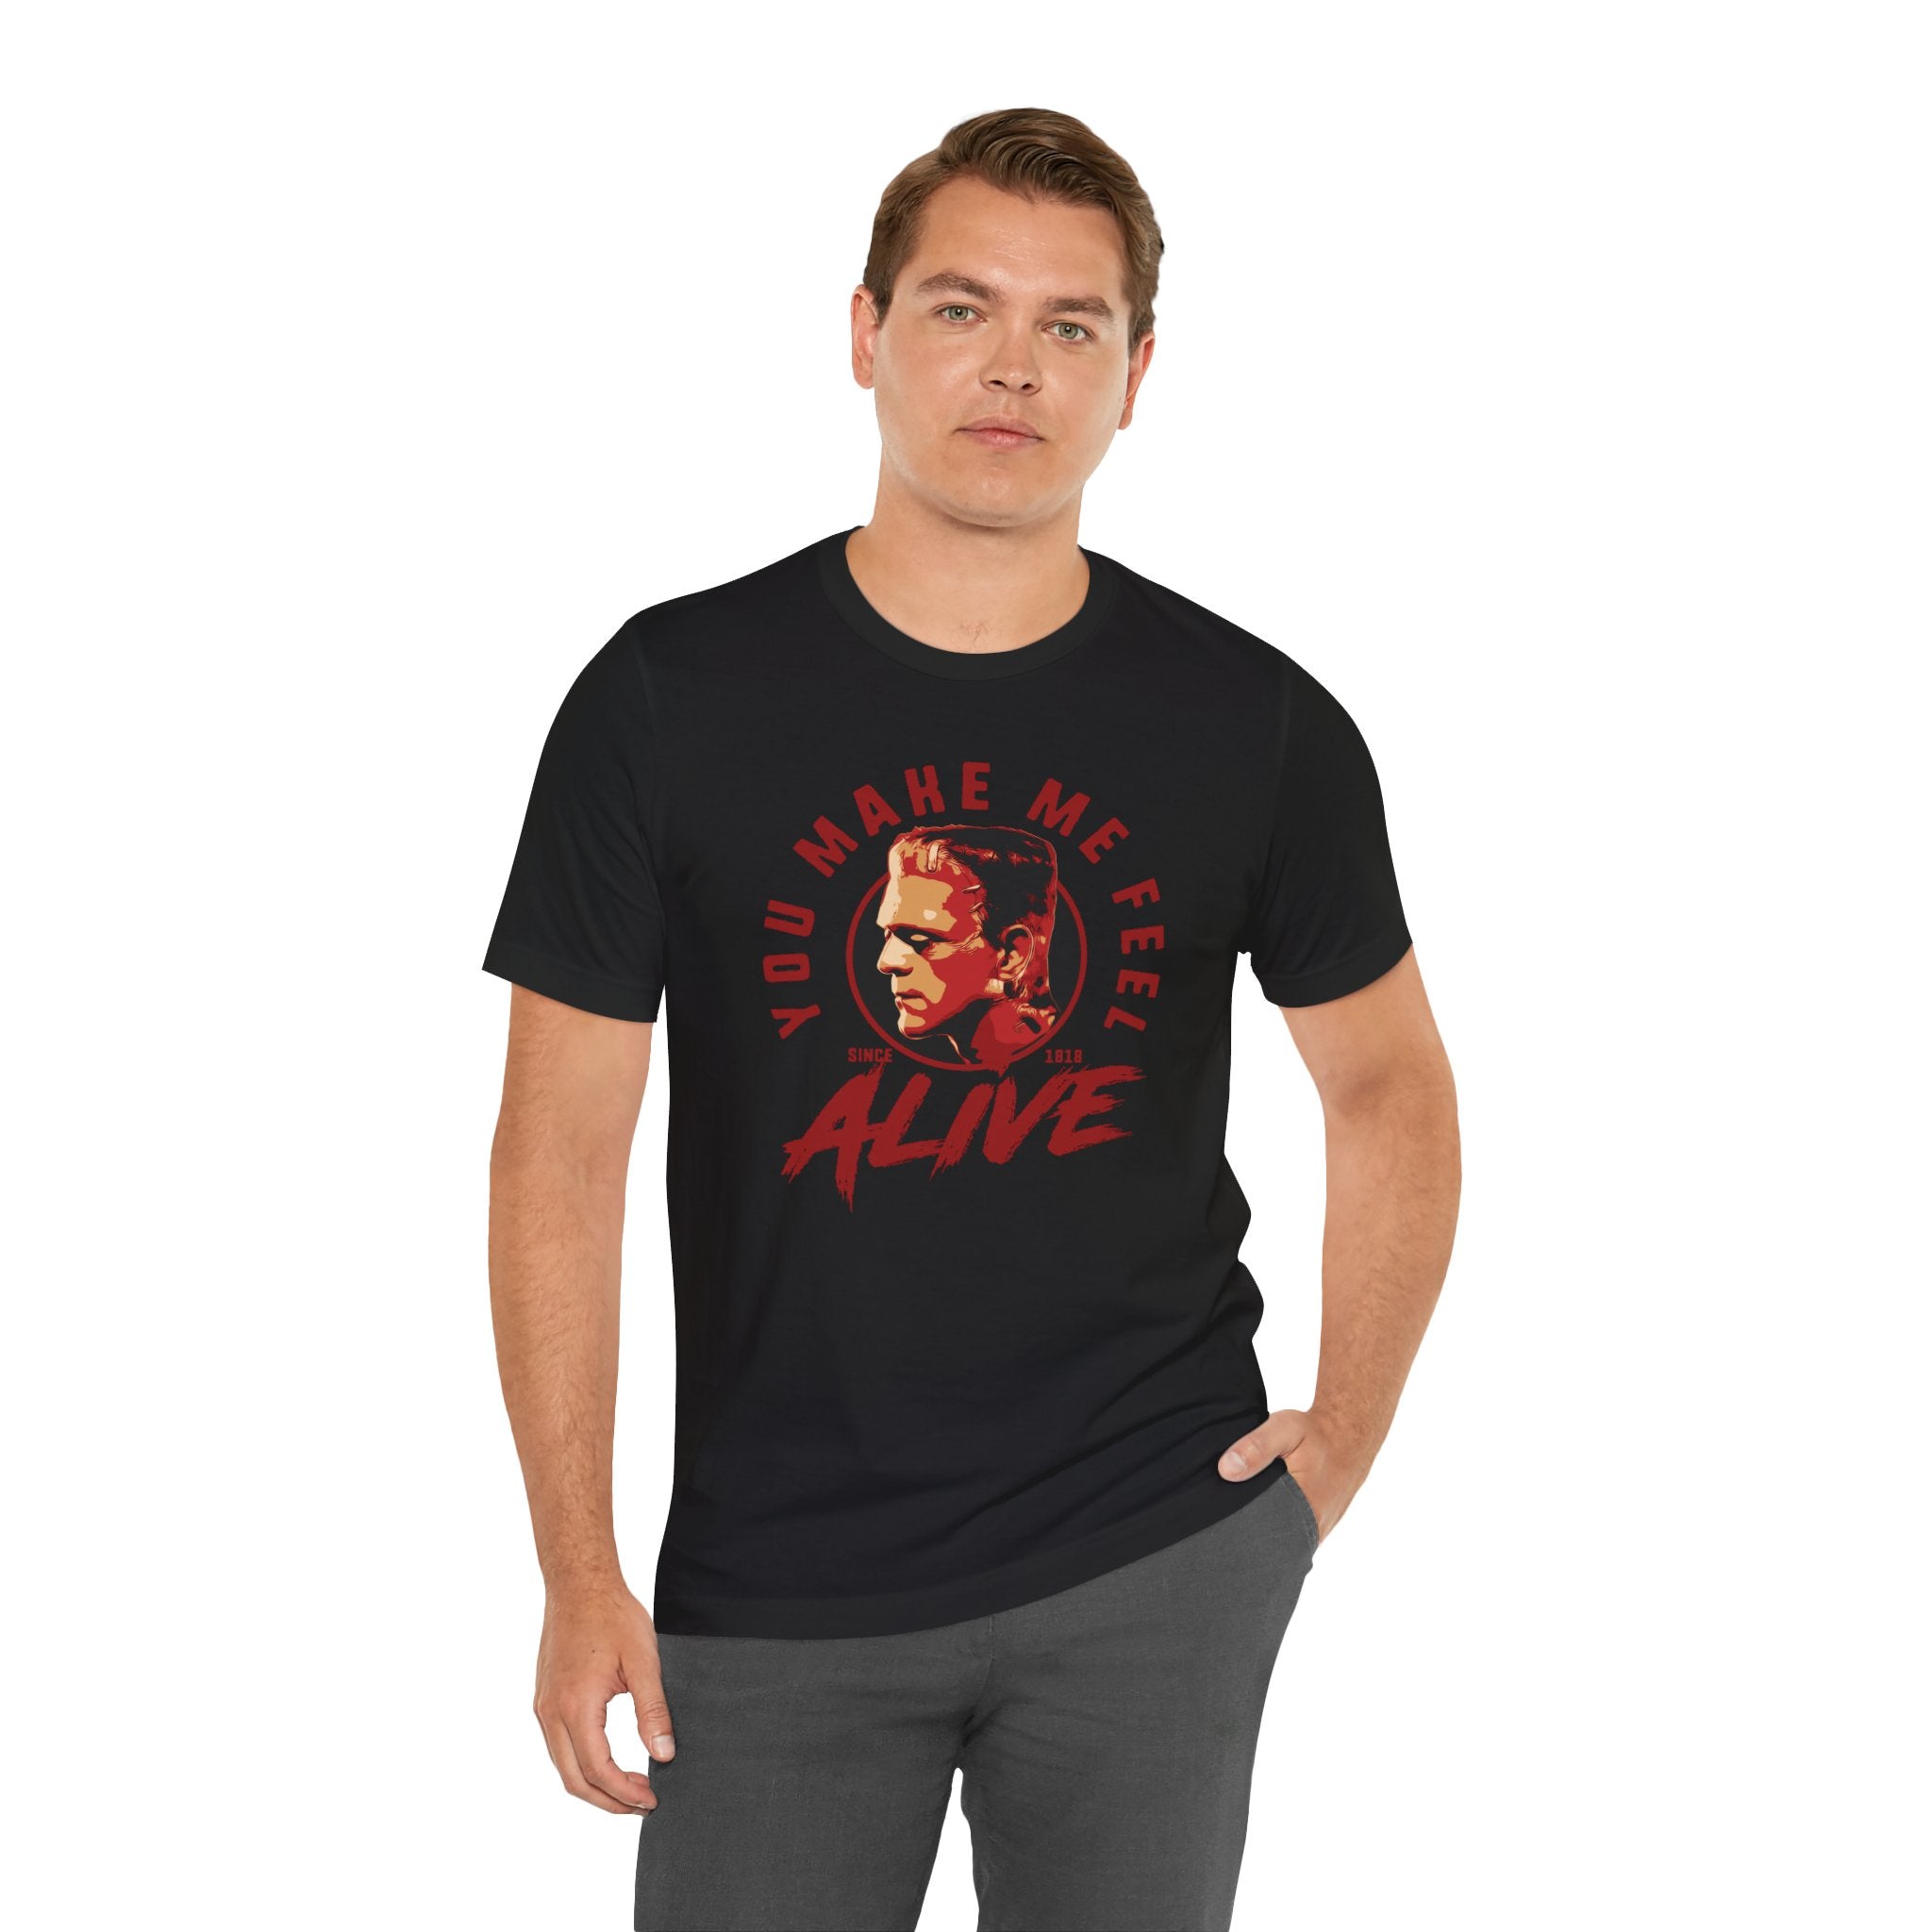 Man wearing a black You Make Me Feel Alive unisex tee with red and yellow quality print, standing against a plain background.